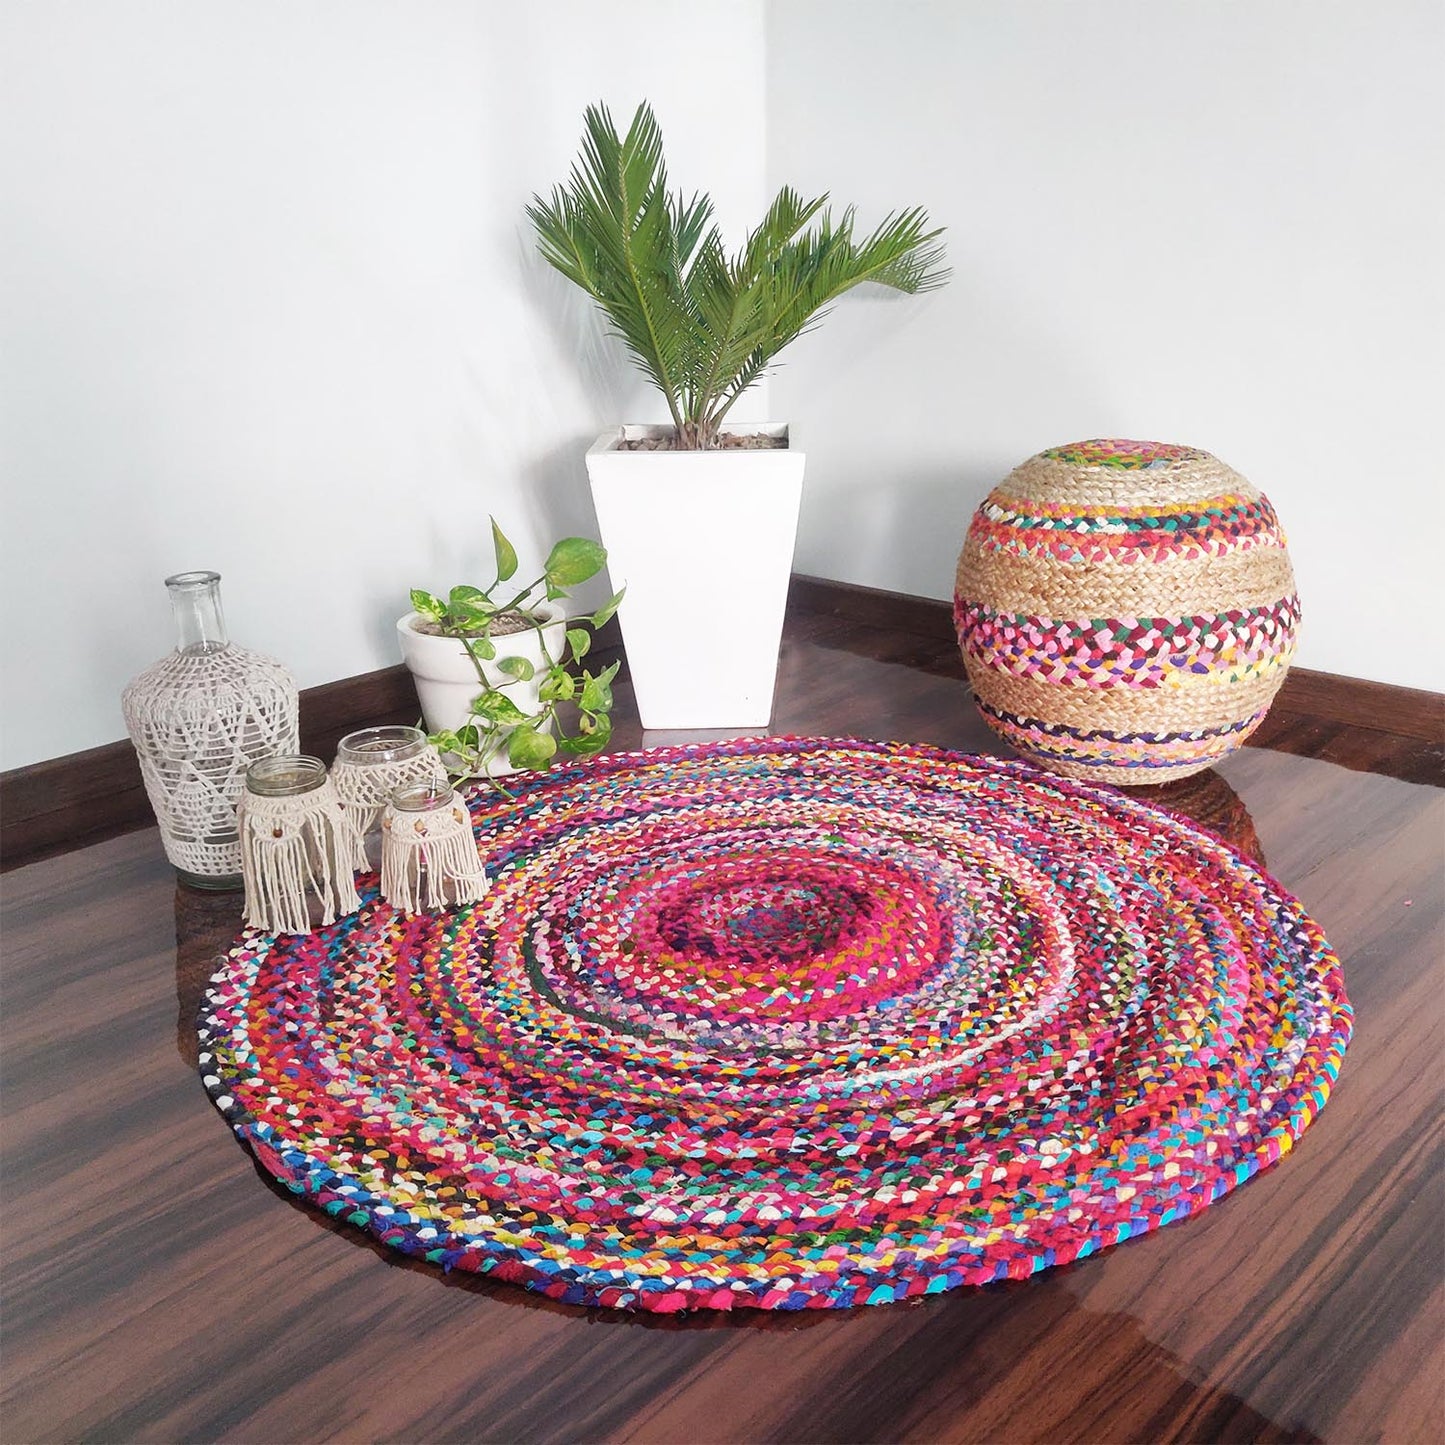 Rag Rug in Colorful Chindi – Braided – Contemporary Colorful Design – Reversible -105 cm (~3.5 feet) Round – Avioni Premium Eco Collection – Best Seller00